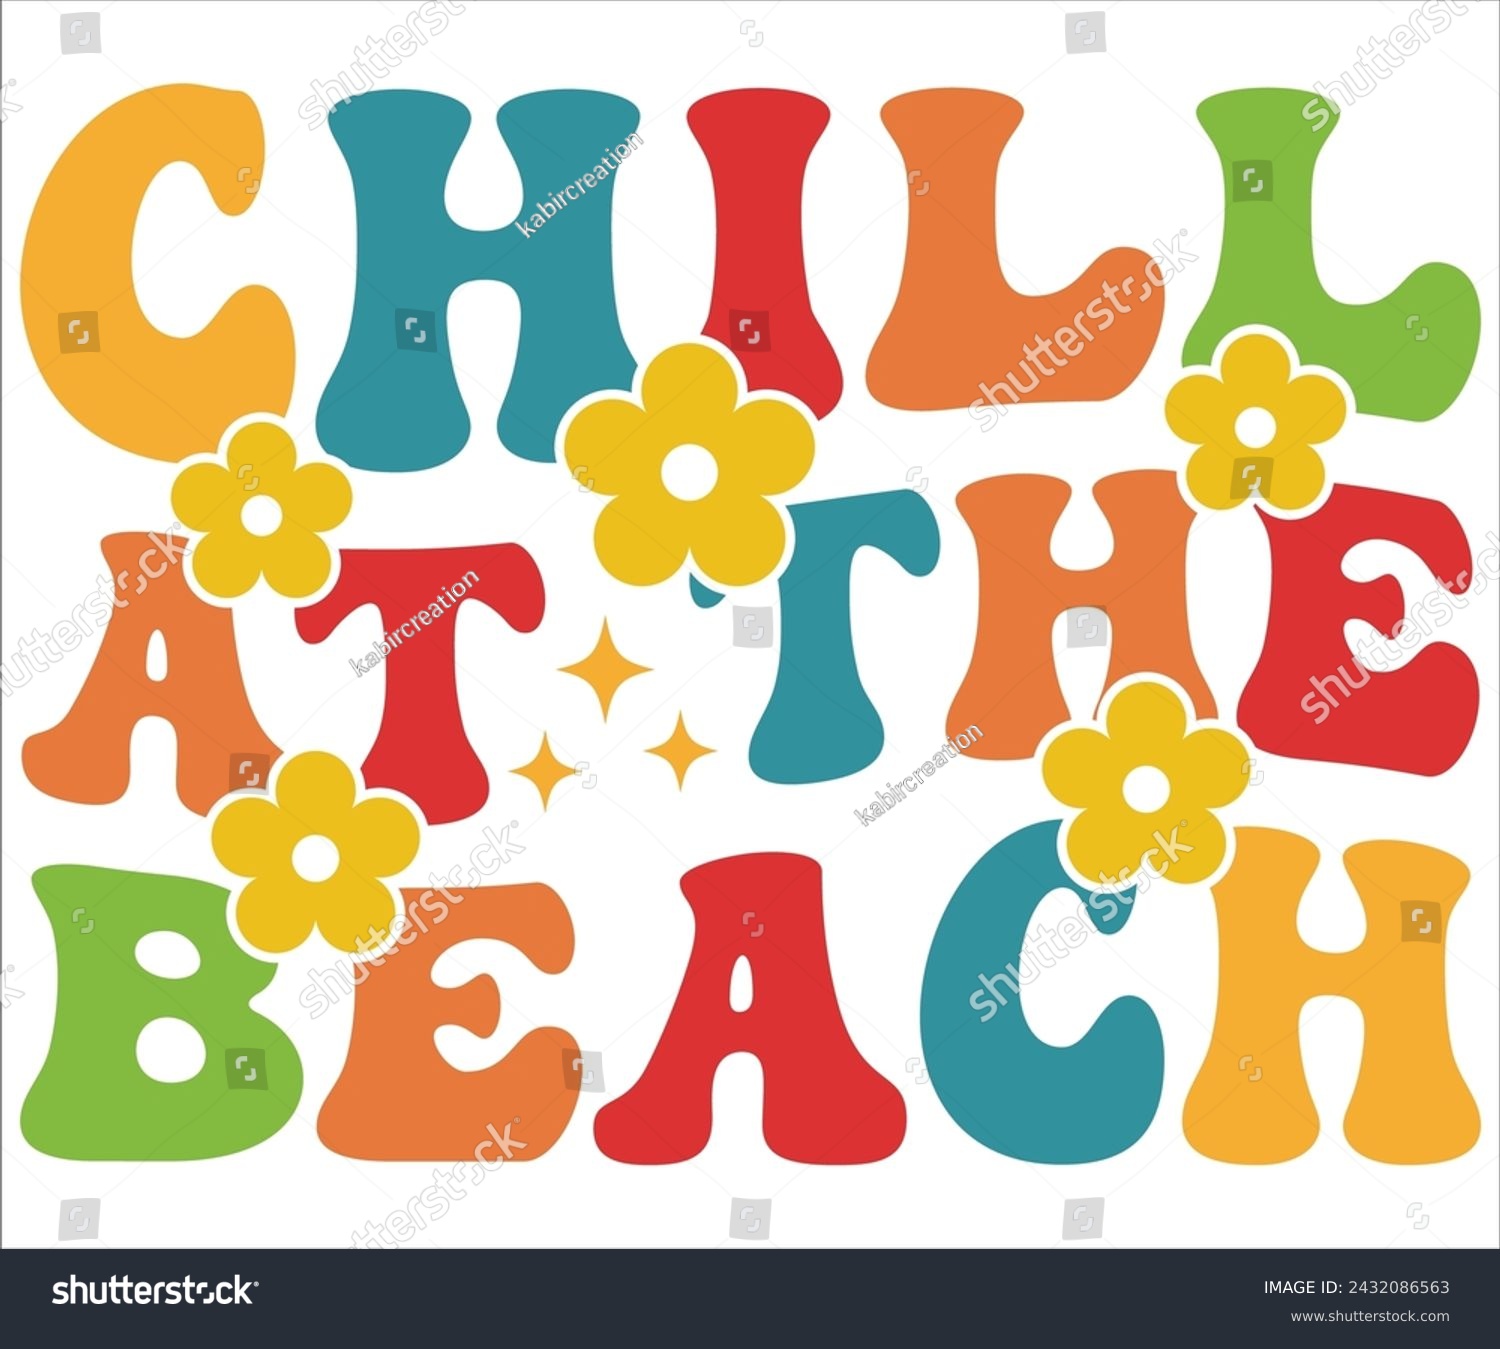 SVG of Chill At The Beach T-shirt, Happy Summer Day T-shirt, Happy Summer Day Retro svg,Hello Summer Retro Svg,summer Beach Vibes Shirt, Vacation, Cut File for Cricut svg